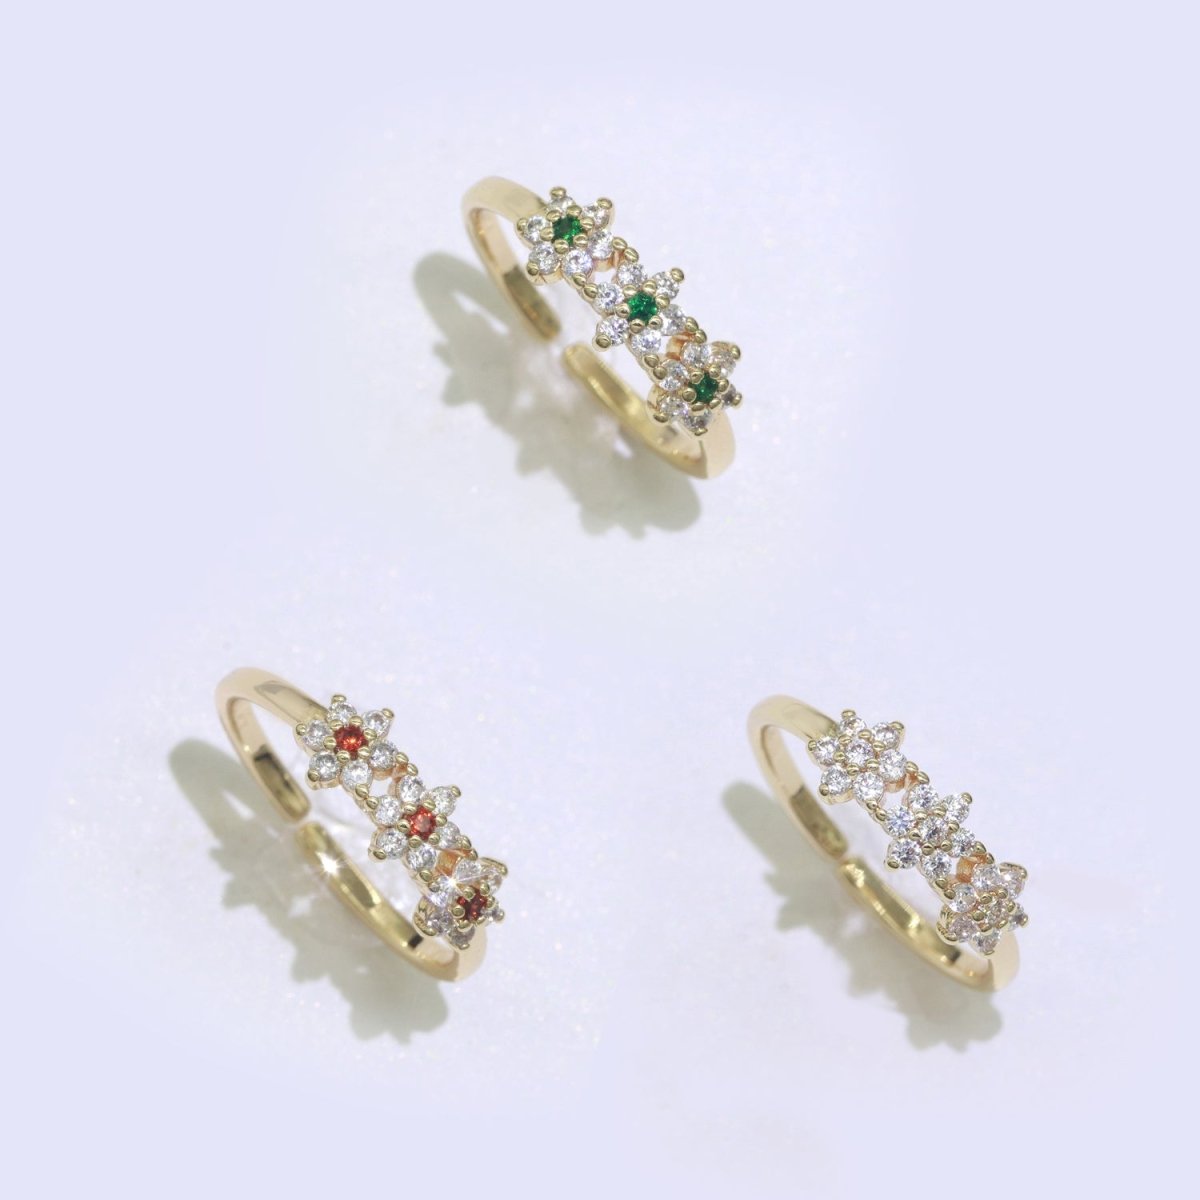 Dainty Flower Ring Open Adjustable Ring Cubic Zirconia Clear/Green/Red Cz Stone O-923 O-924 - DLUXCA